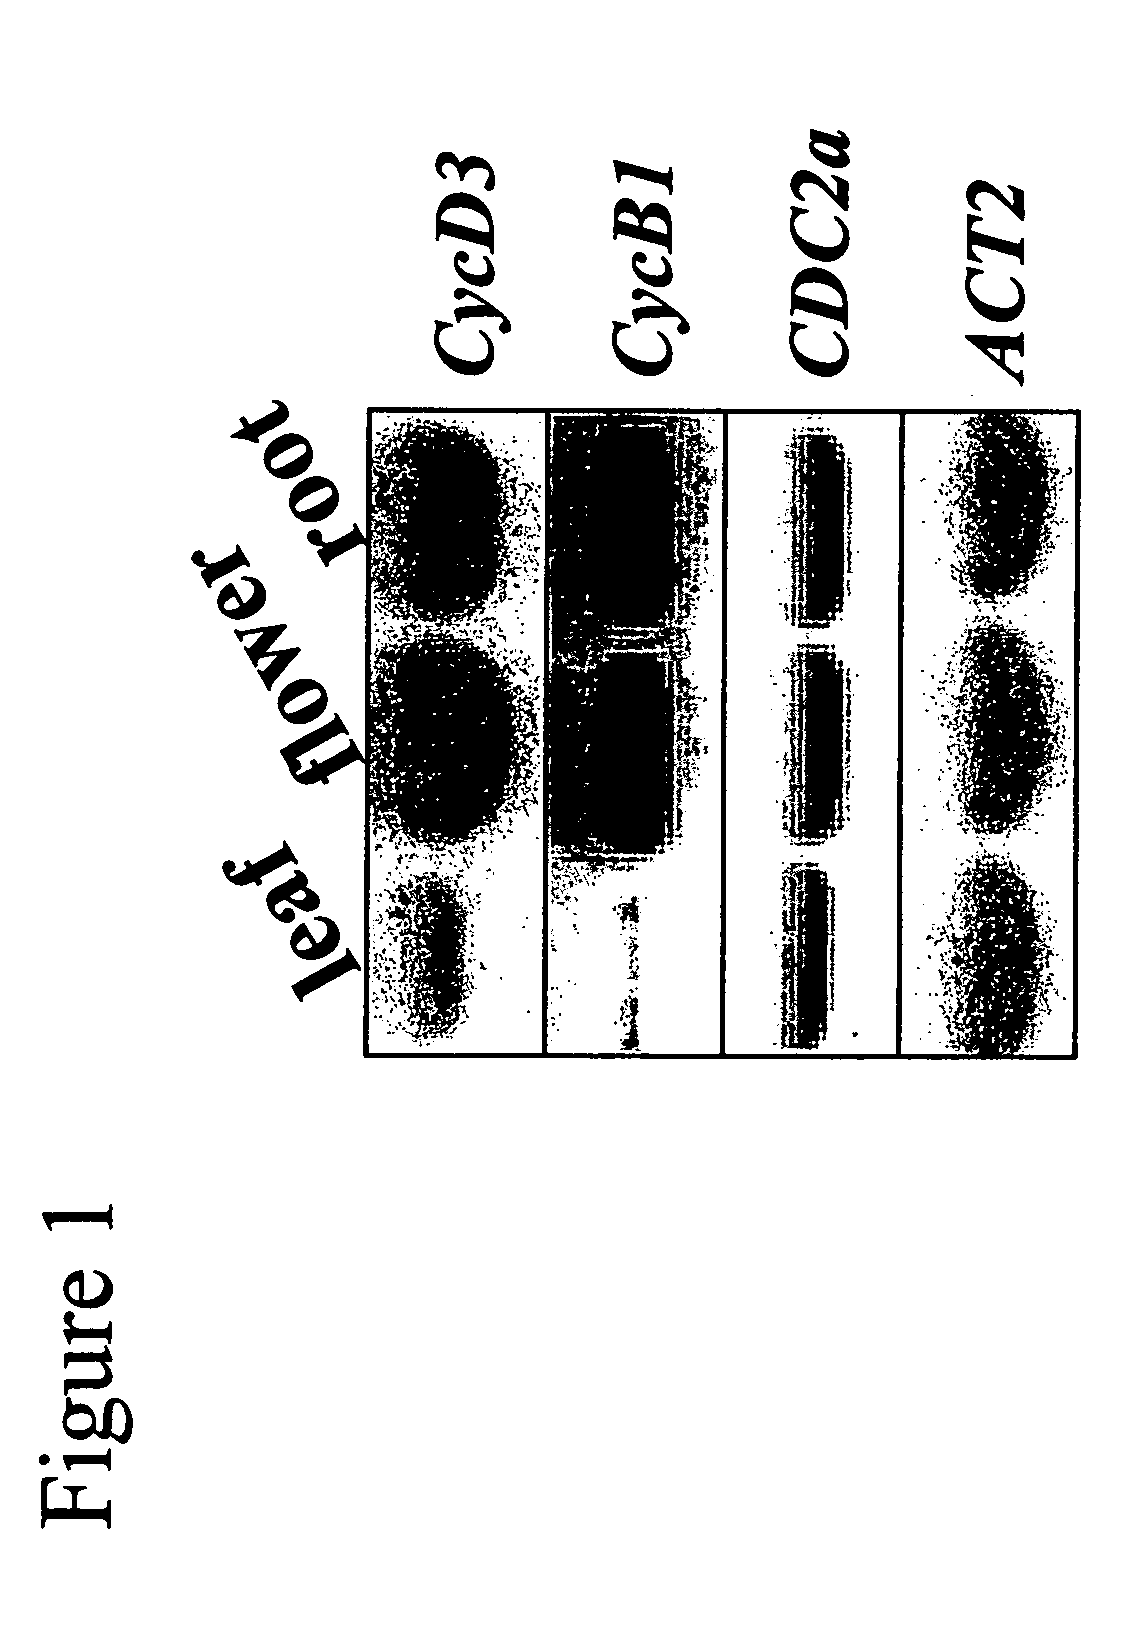 Transgenic plants expressing cytokinin biosynthetic genes and methods of use therefor